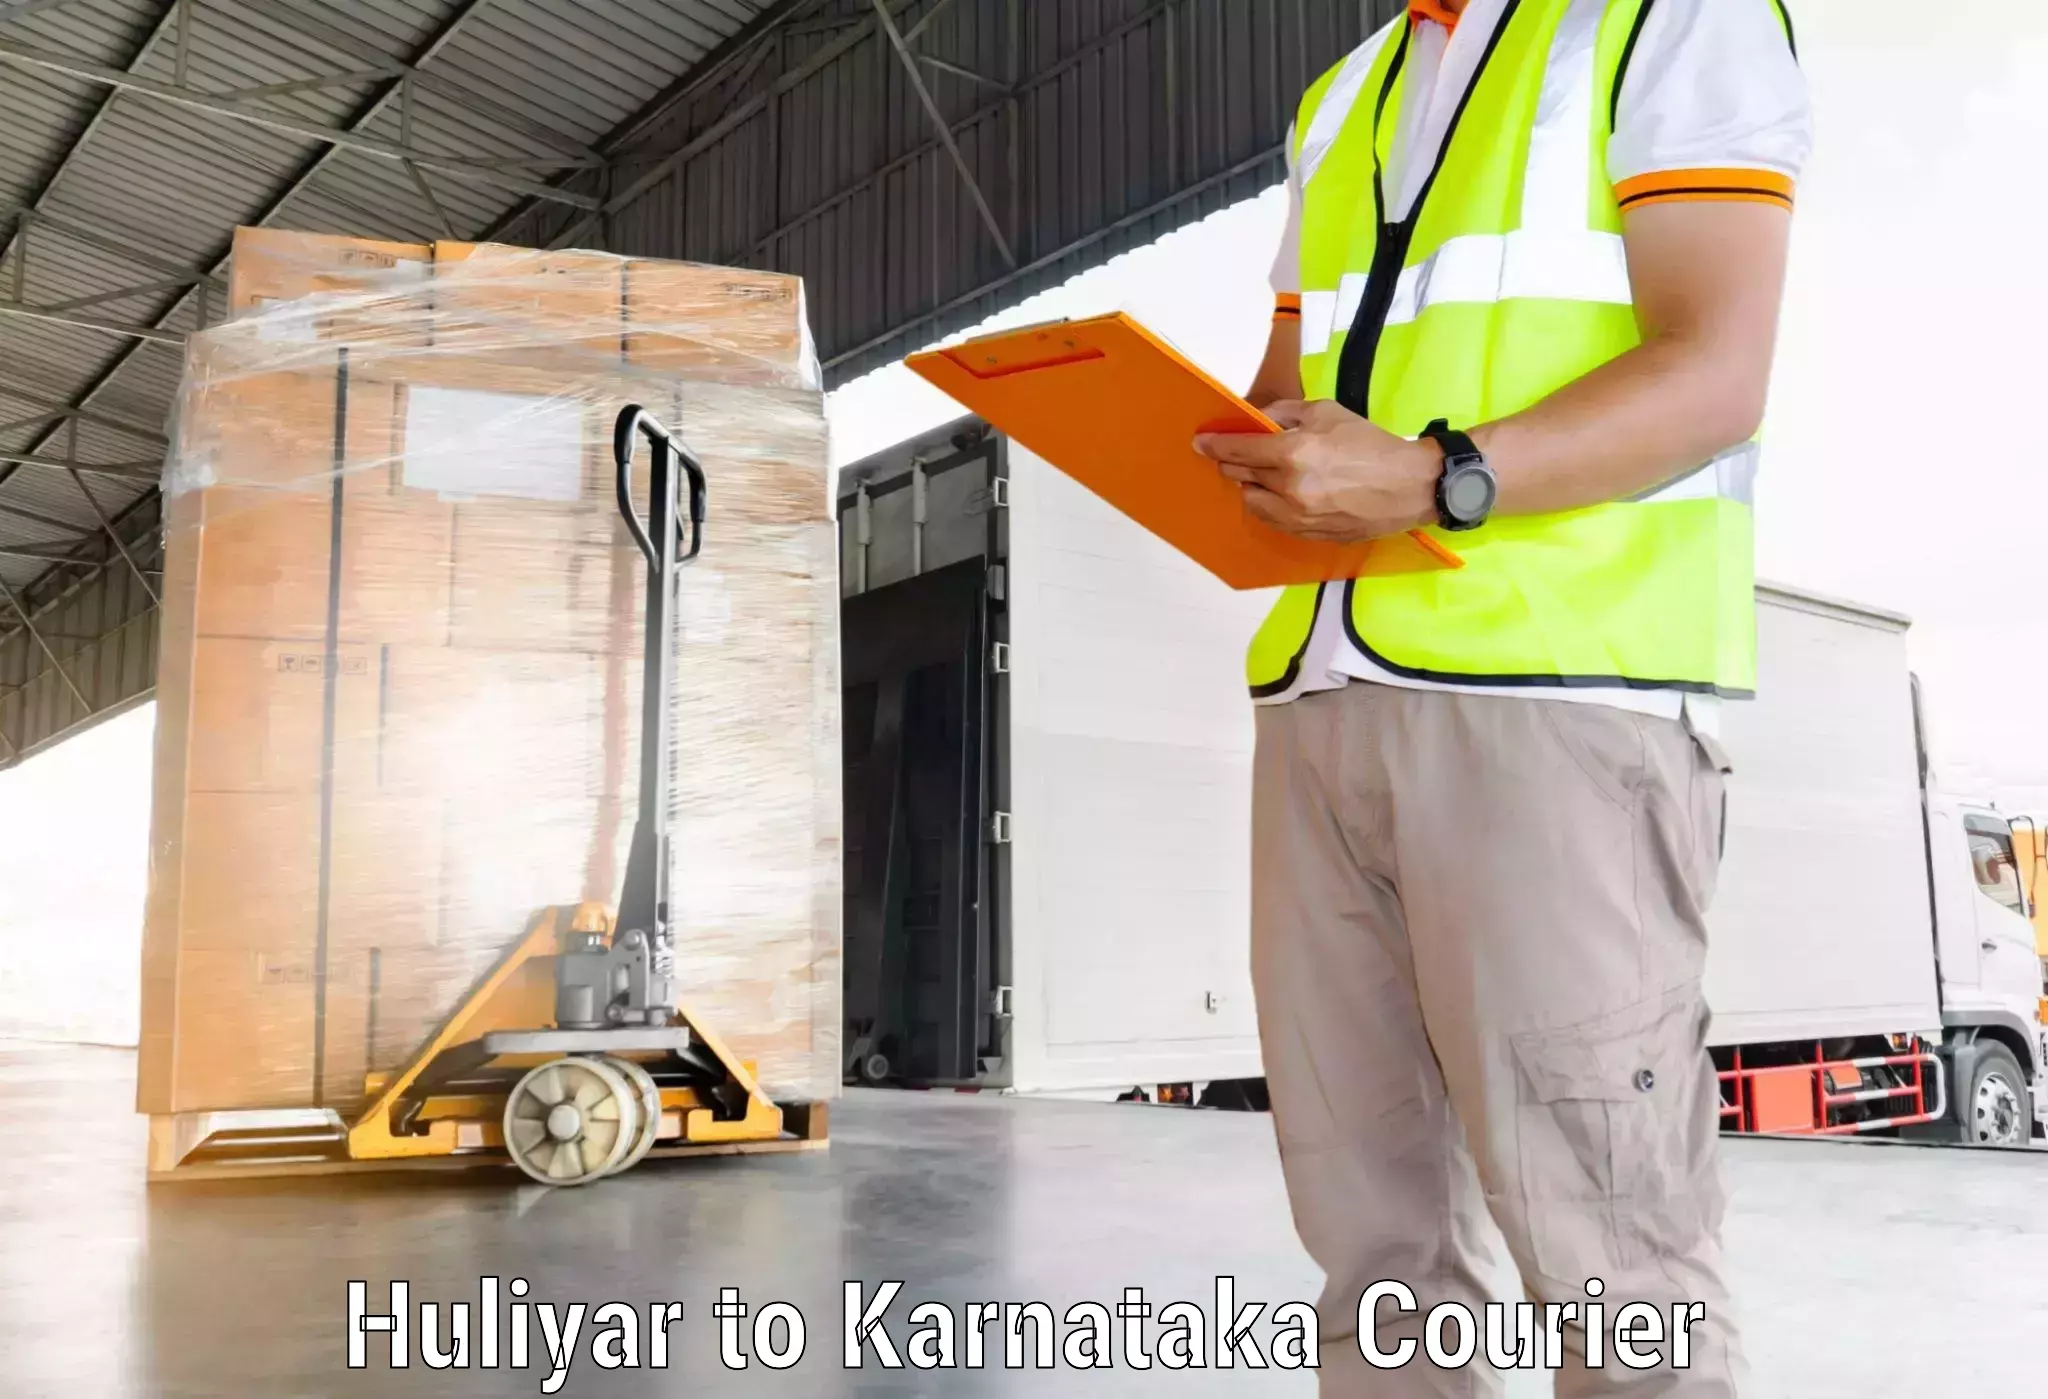 Automated shipping processes Huliyar to Manipal Academy of Higher Education